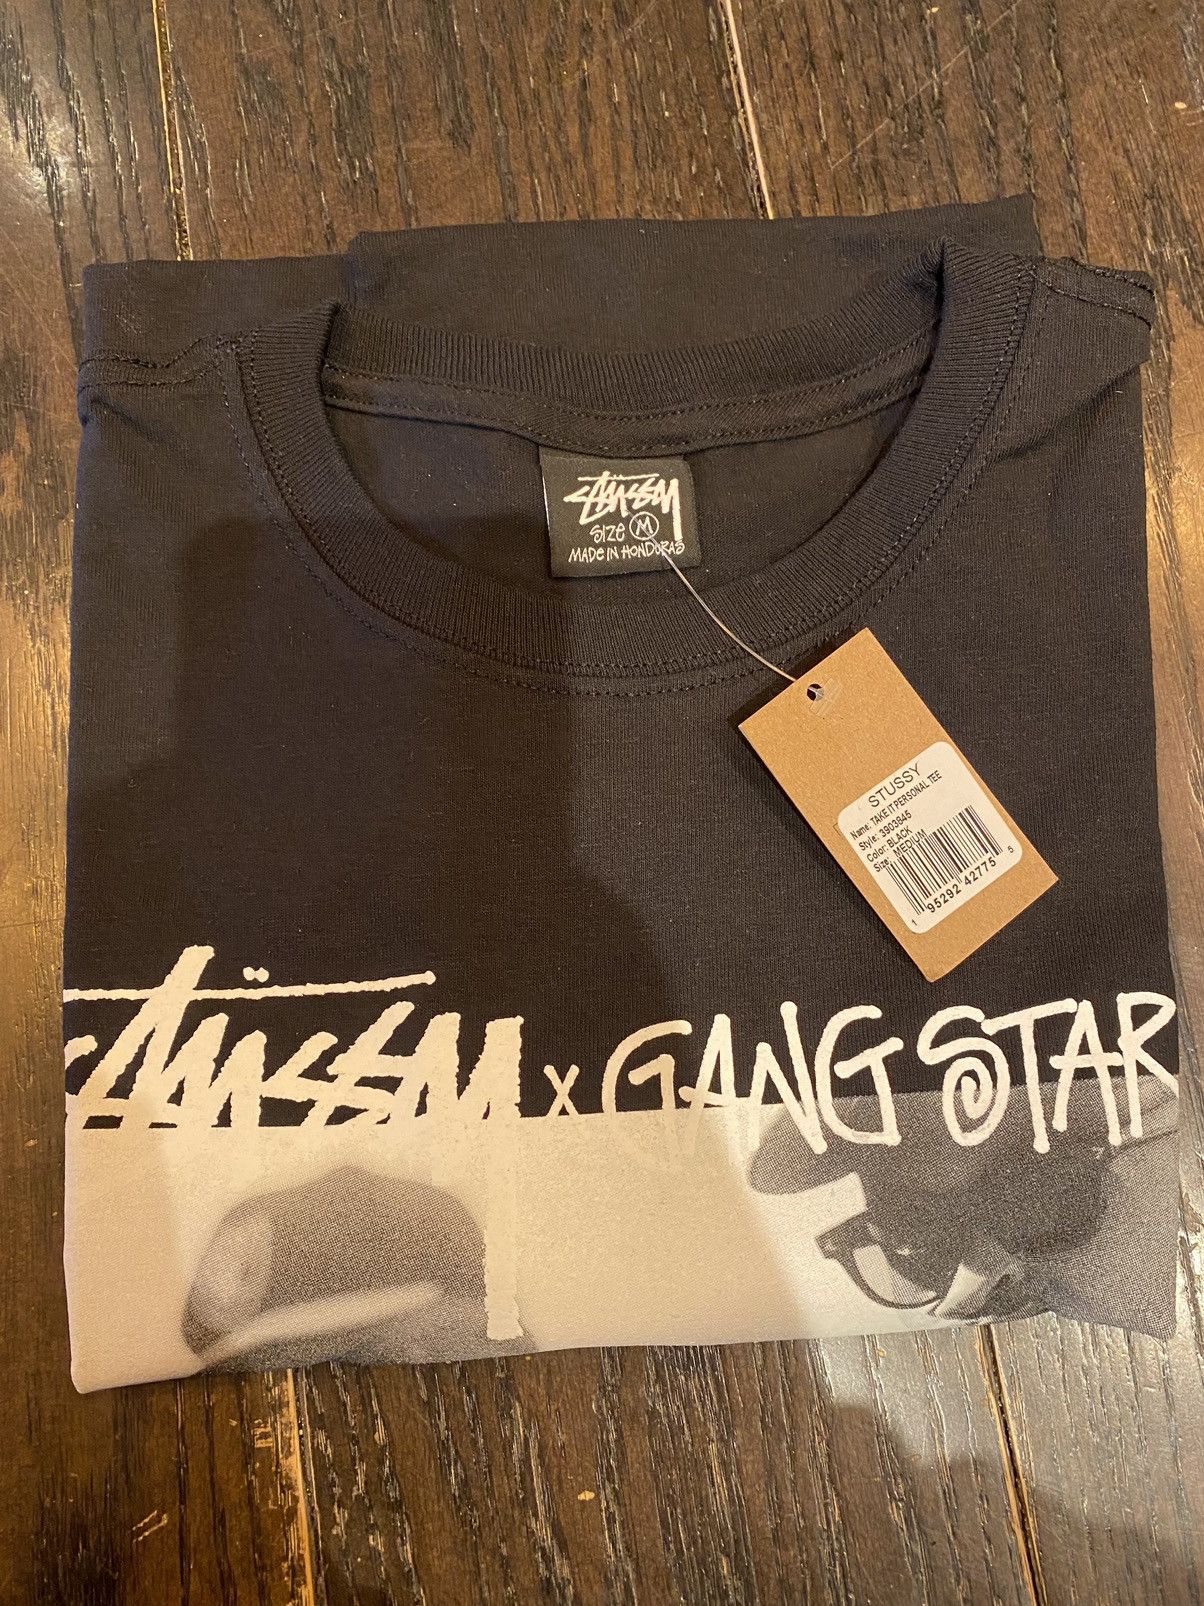 Stussy Stussy Gang Starr Take It Personal Tee In Hand | Grailed